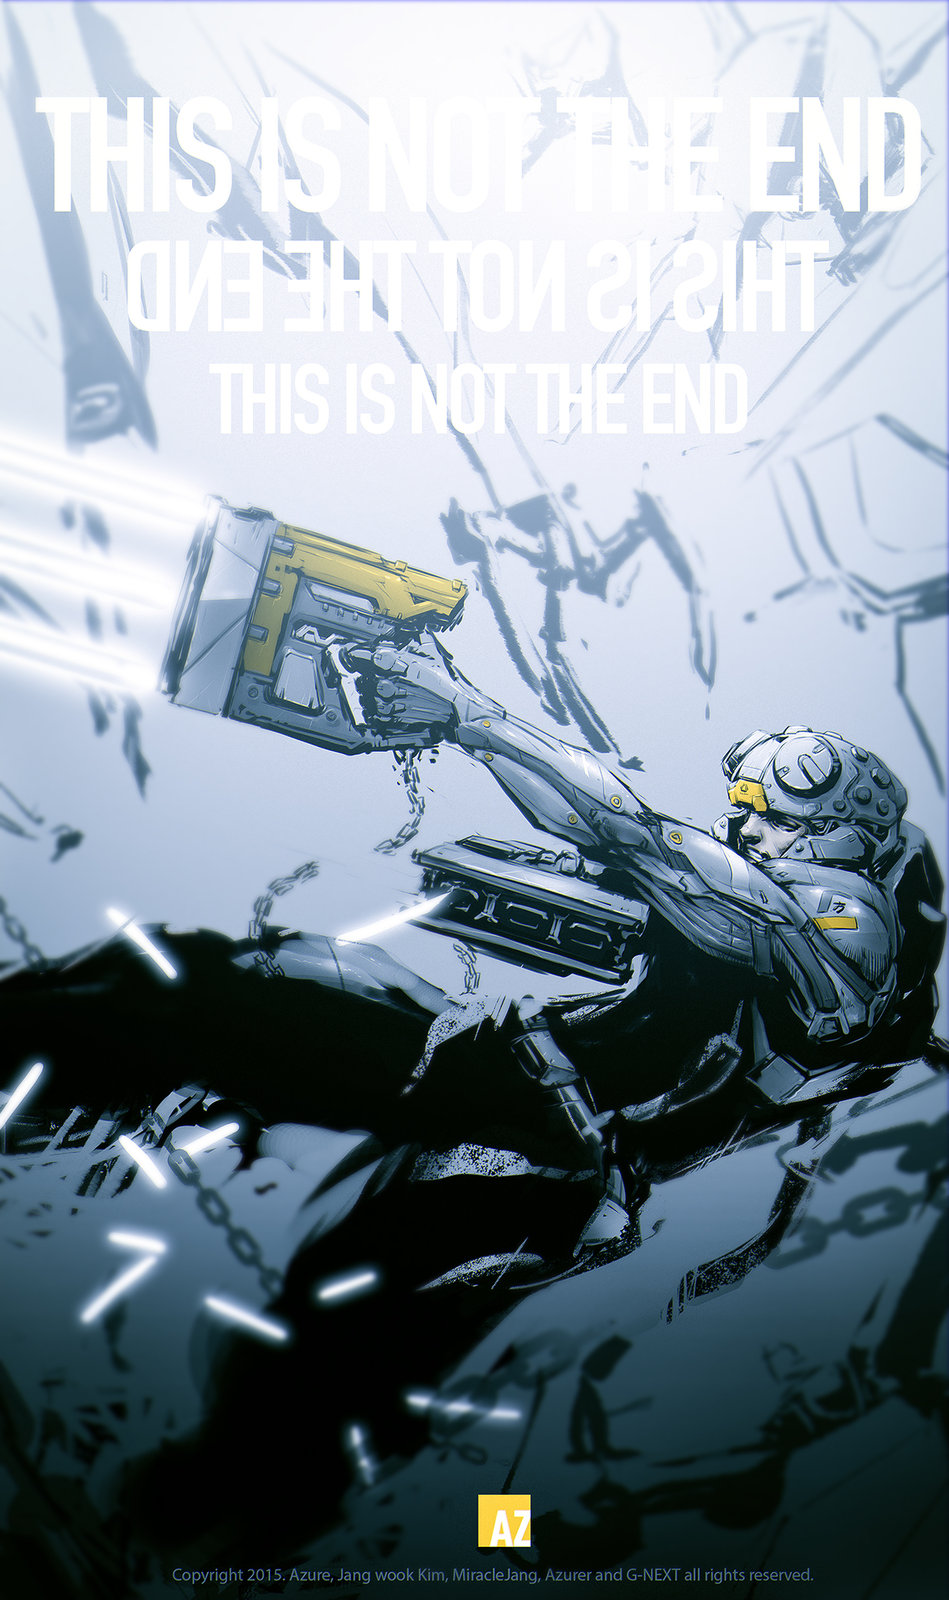 "This is not the End"